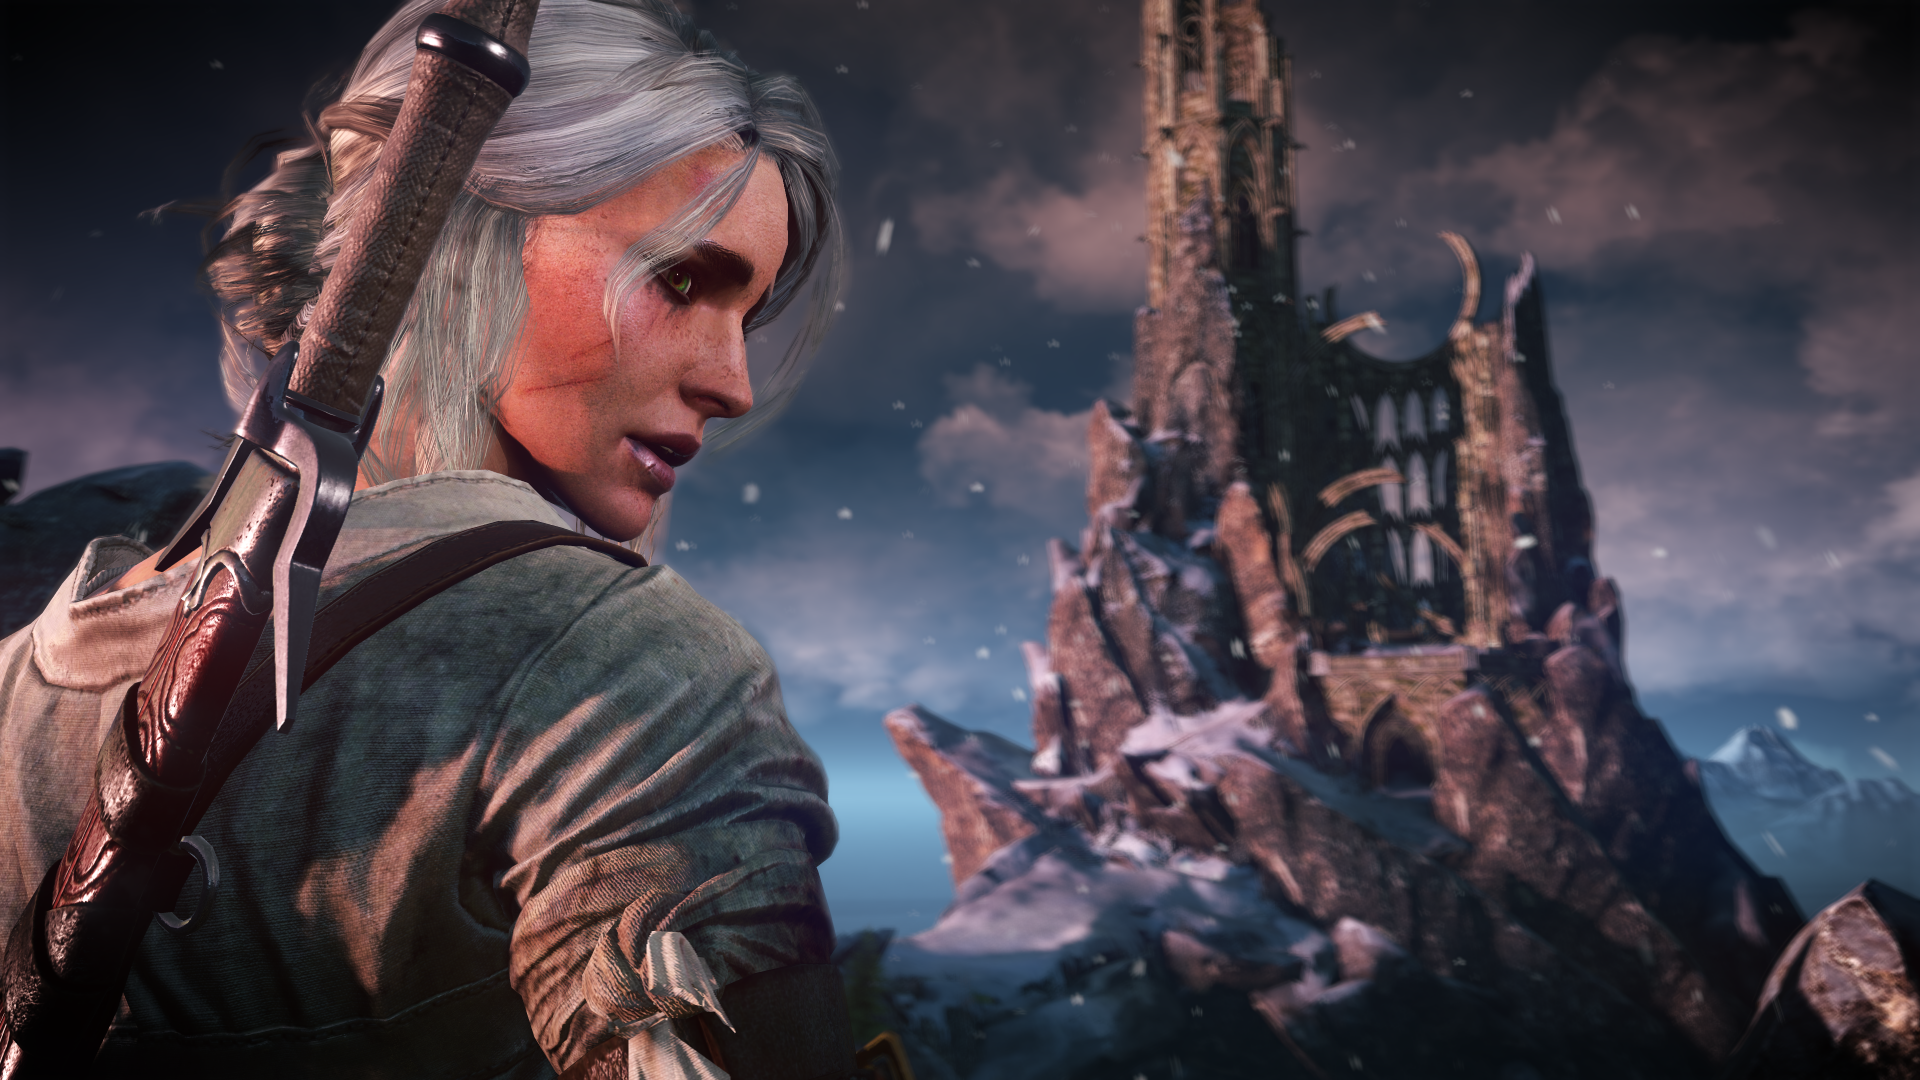 Here’s What You’ll Need to Run The Witcher 3 on PC